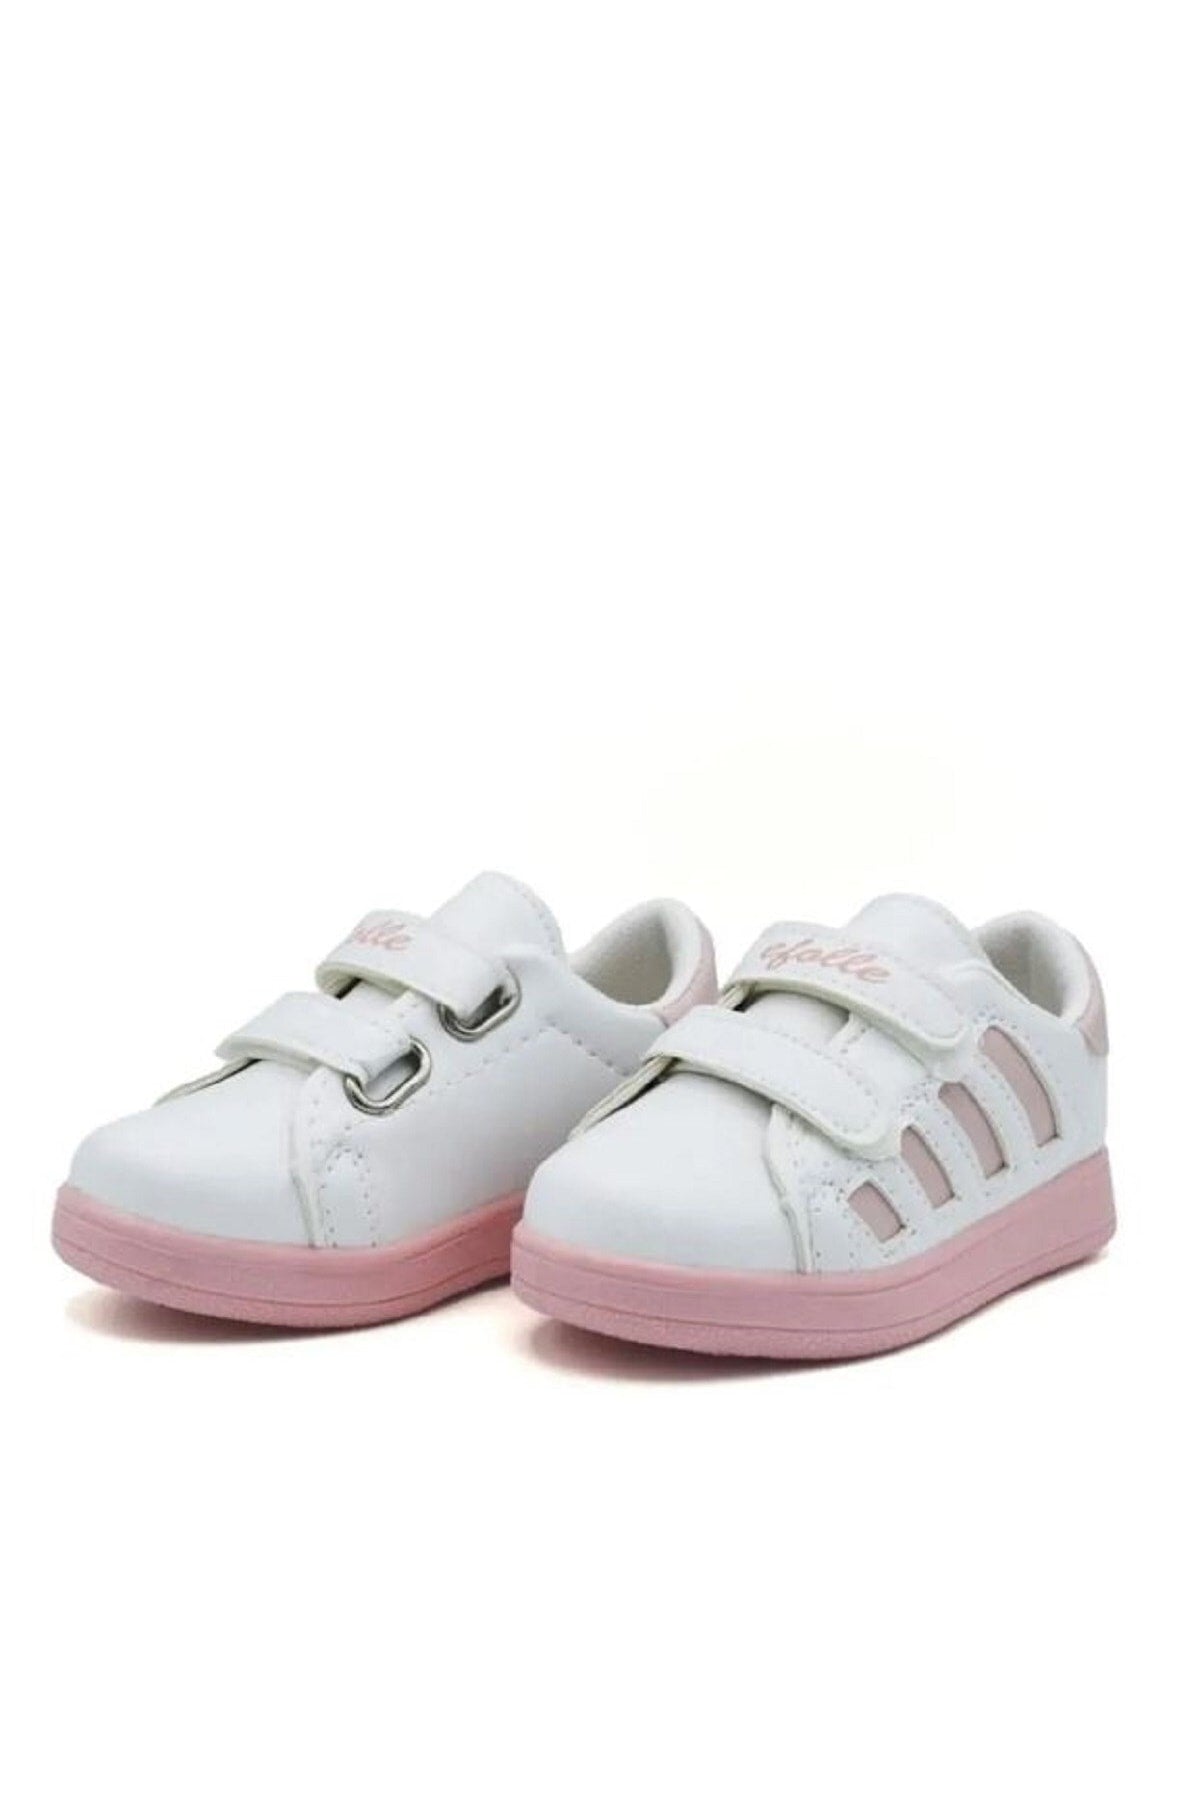 Daily Girl - Boy Baby Baby Sneaker Sneake Shoes 2 Double Call Banded Ribbon 1002